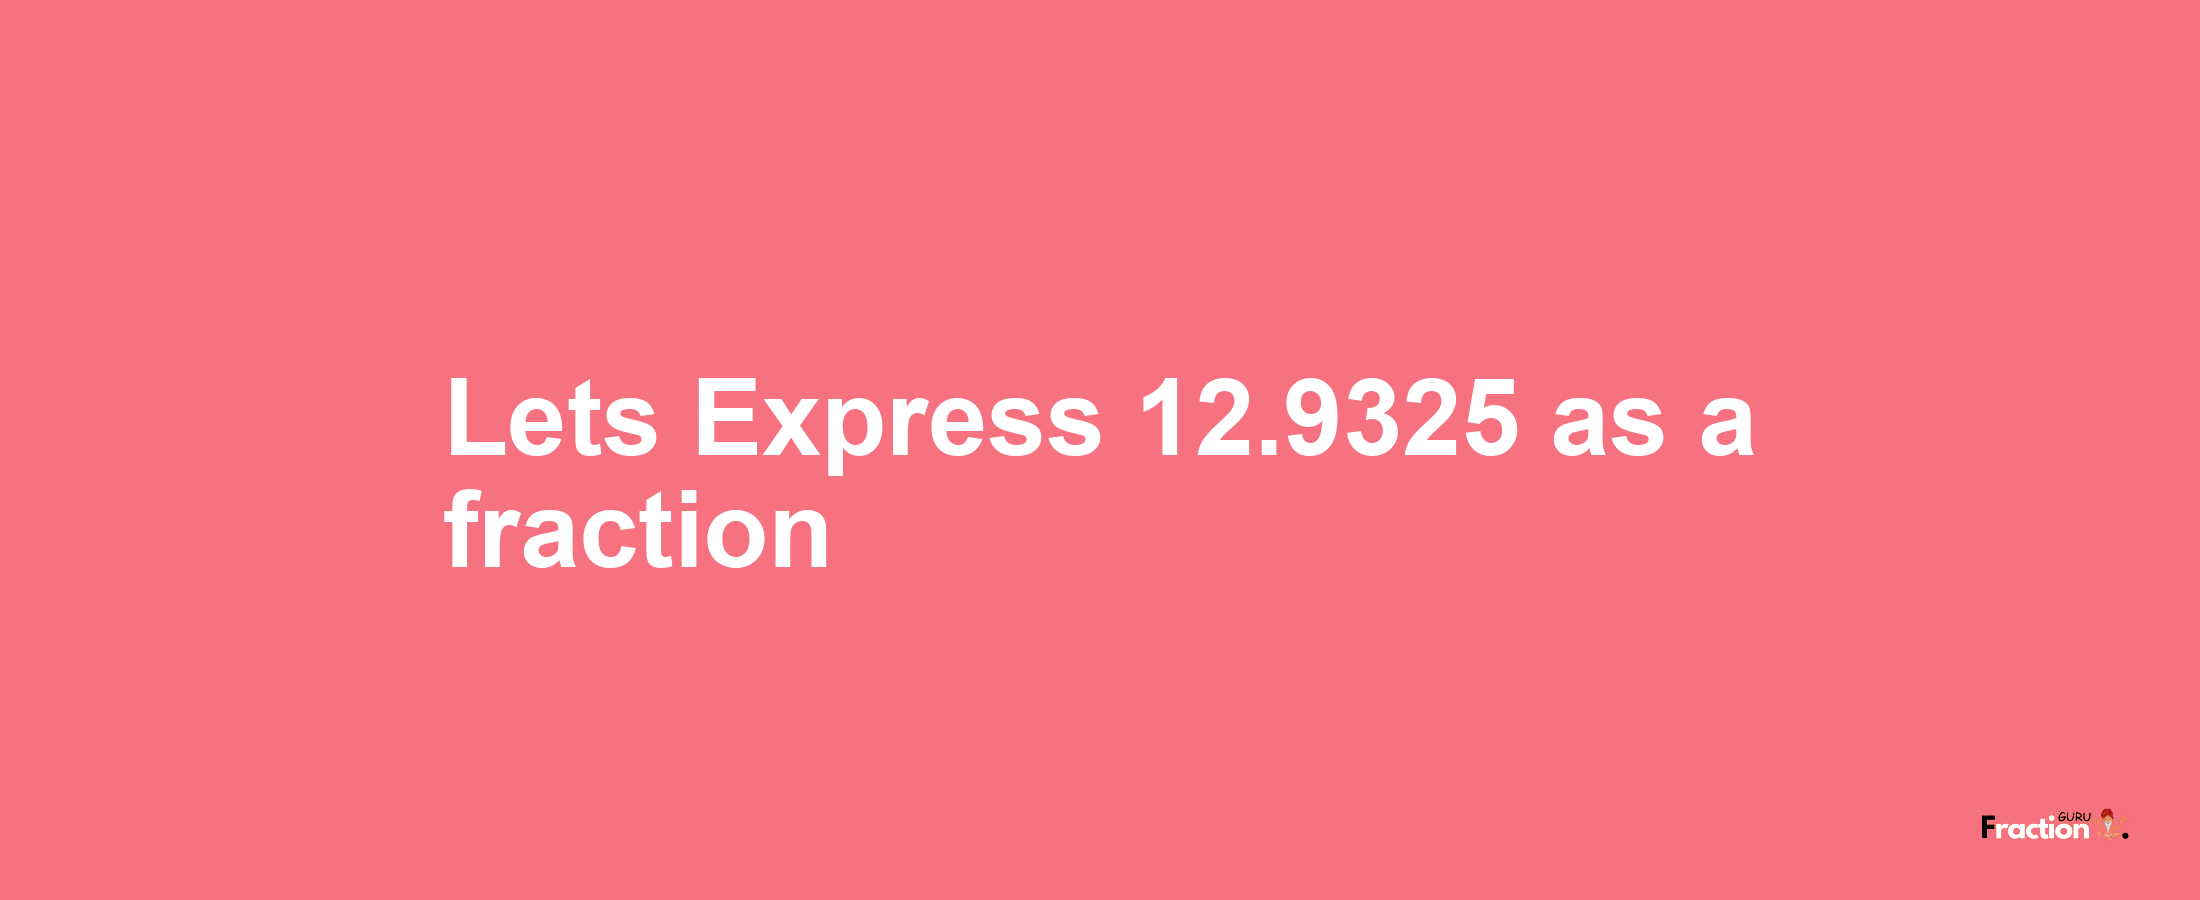 Lets Express 12.9325 as afraction